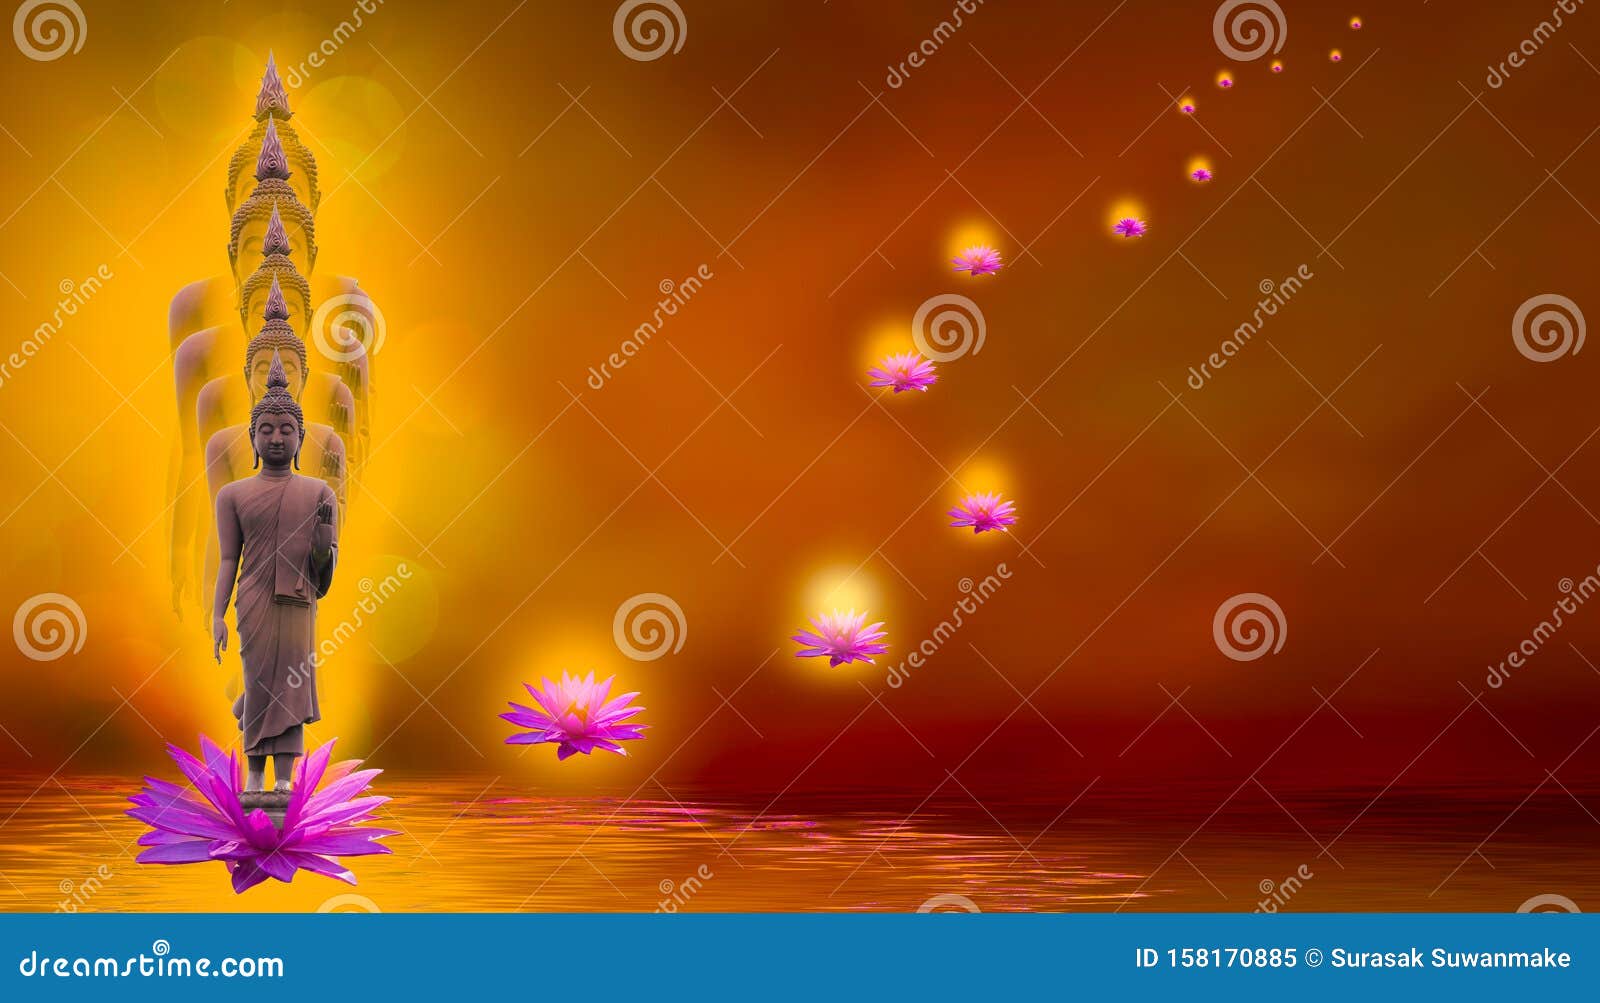 the buddha stands gracefully on a lotus flower with an orange background.about buddhism